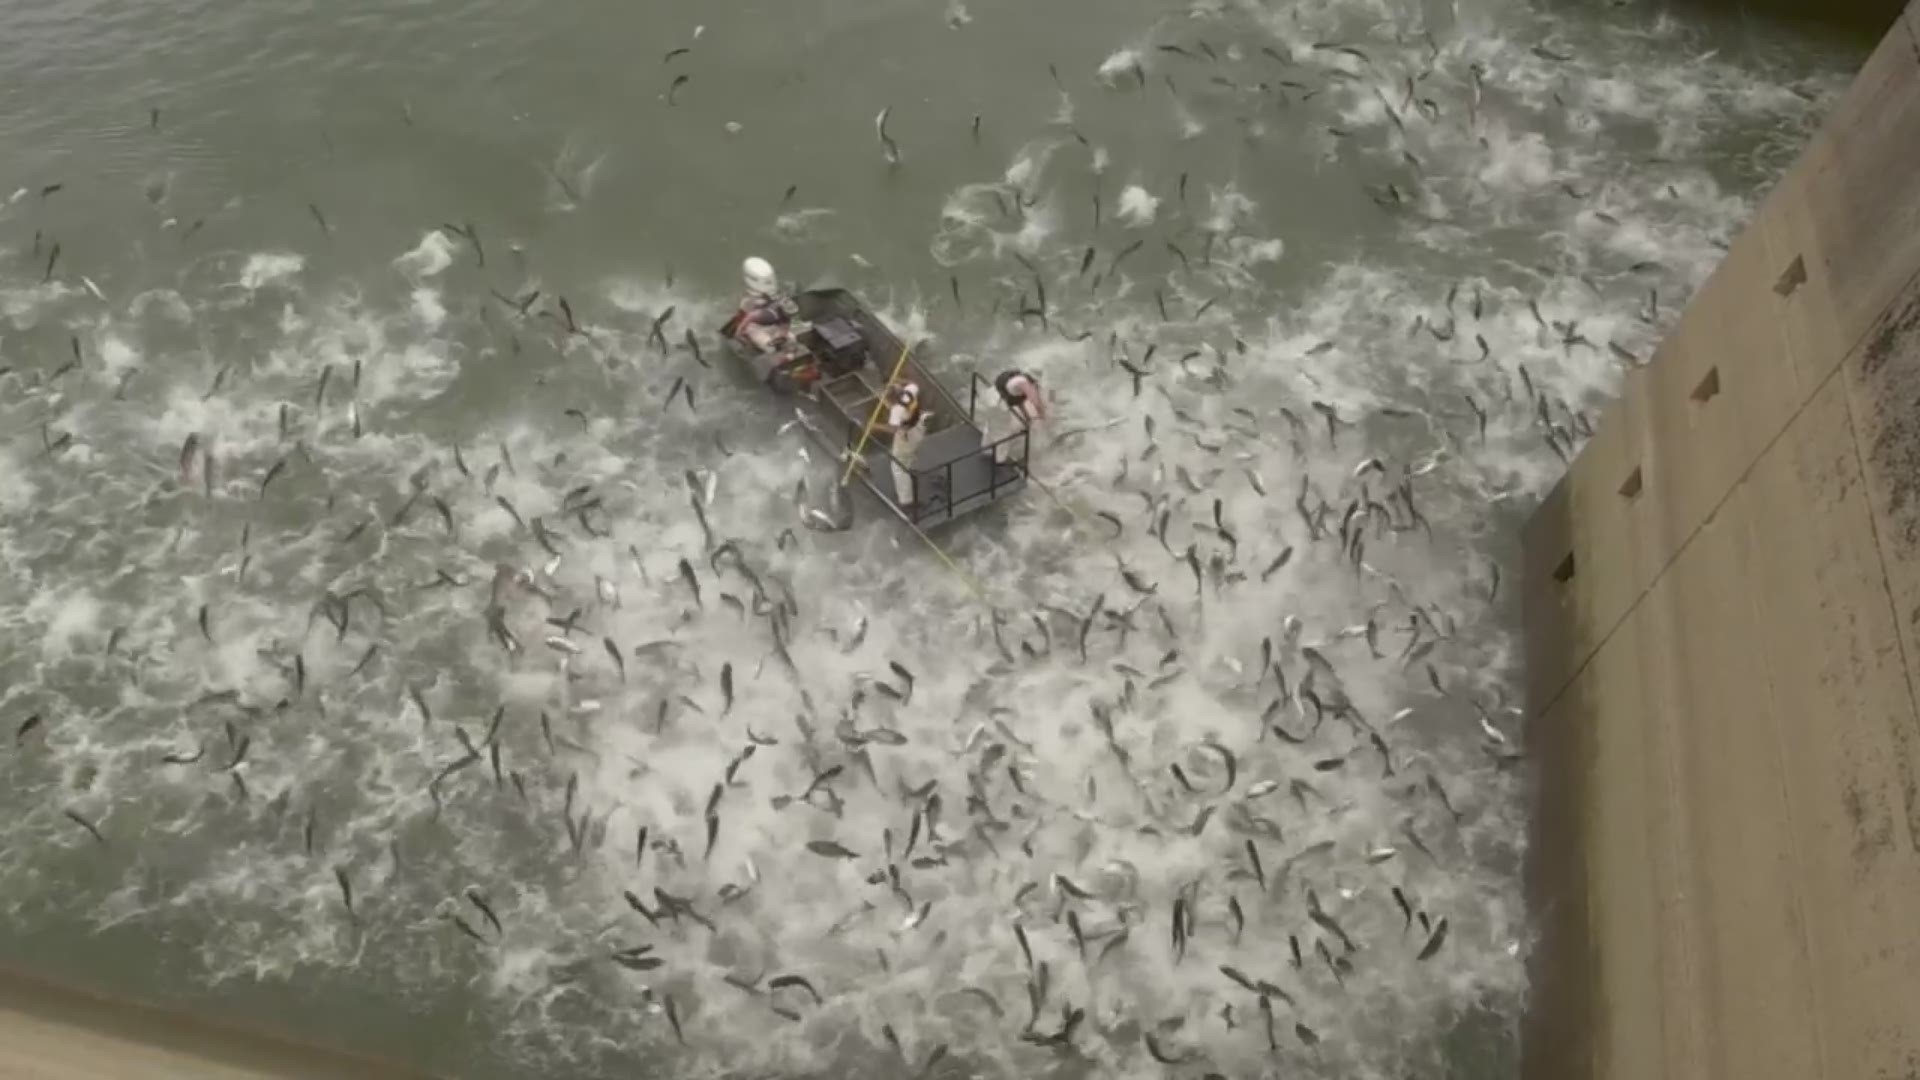 Crews with the Kentucky Department of Fish and Wildlife Resources used “shocking” boats to stun Asian Carp on Tuesday at the Barkley Dam. Asian Carp are invasive to other fish, according to the department.